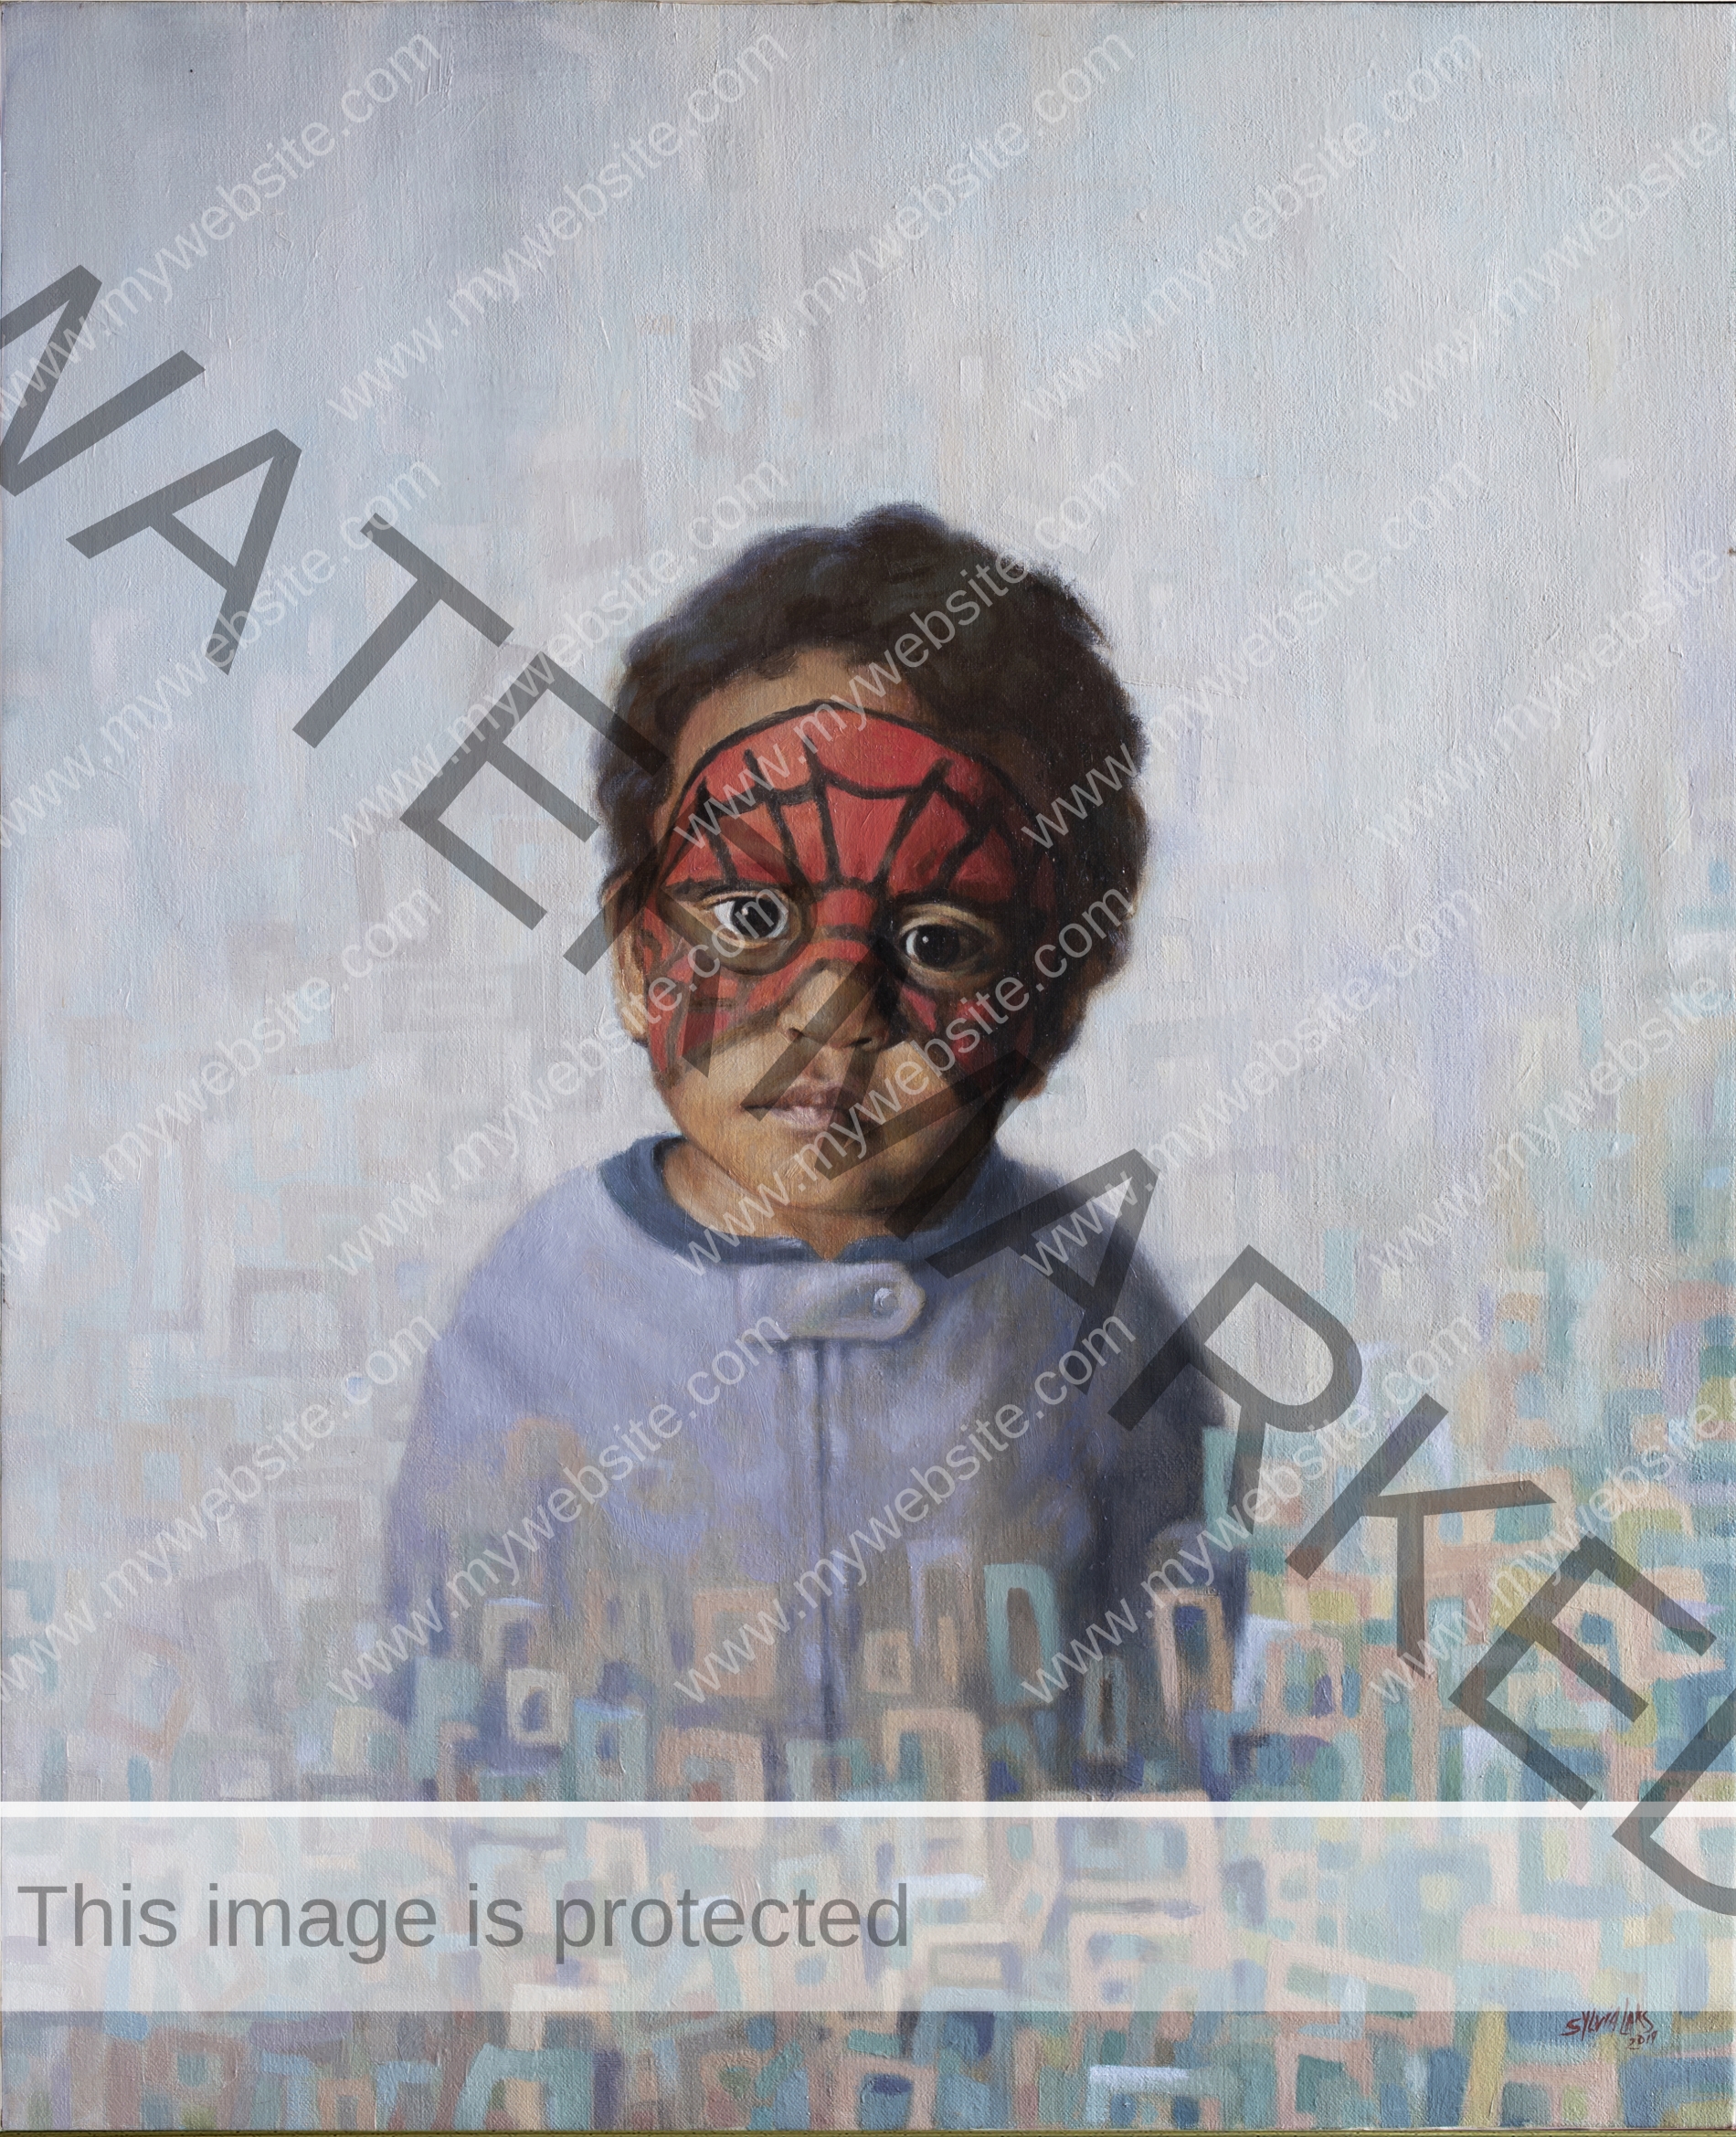 Spiderman painting by Sylvia Laks called Spiderman. It features a little boy with a spider web painted on his face, set against an abstract background. There is contrast between the childlike innocence and the dreamy, whimsical abstraction.